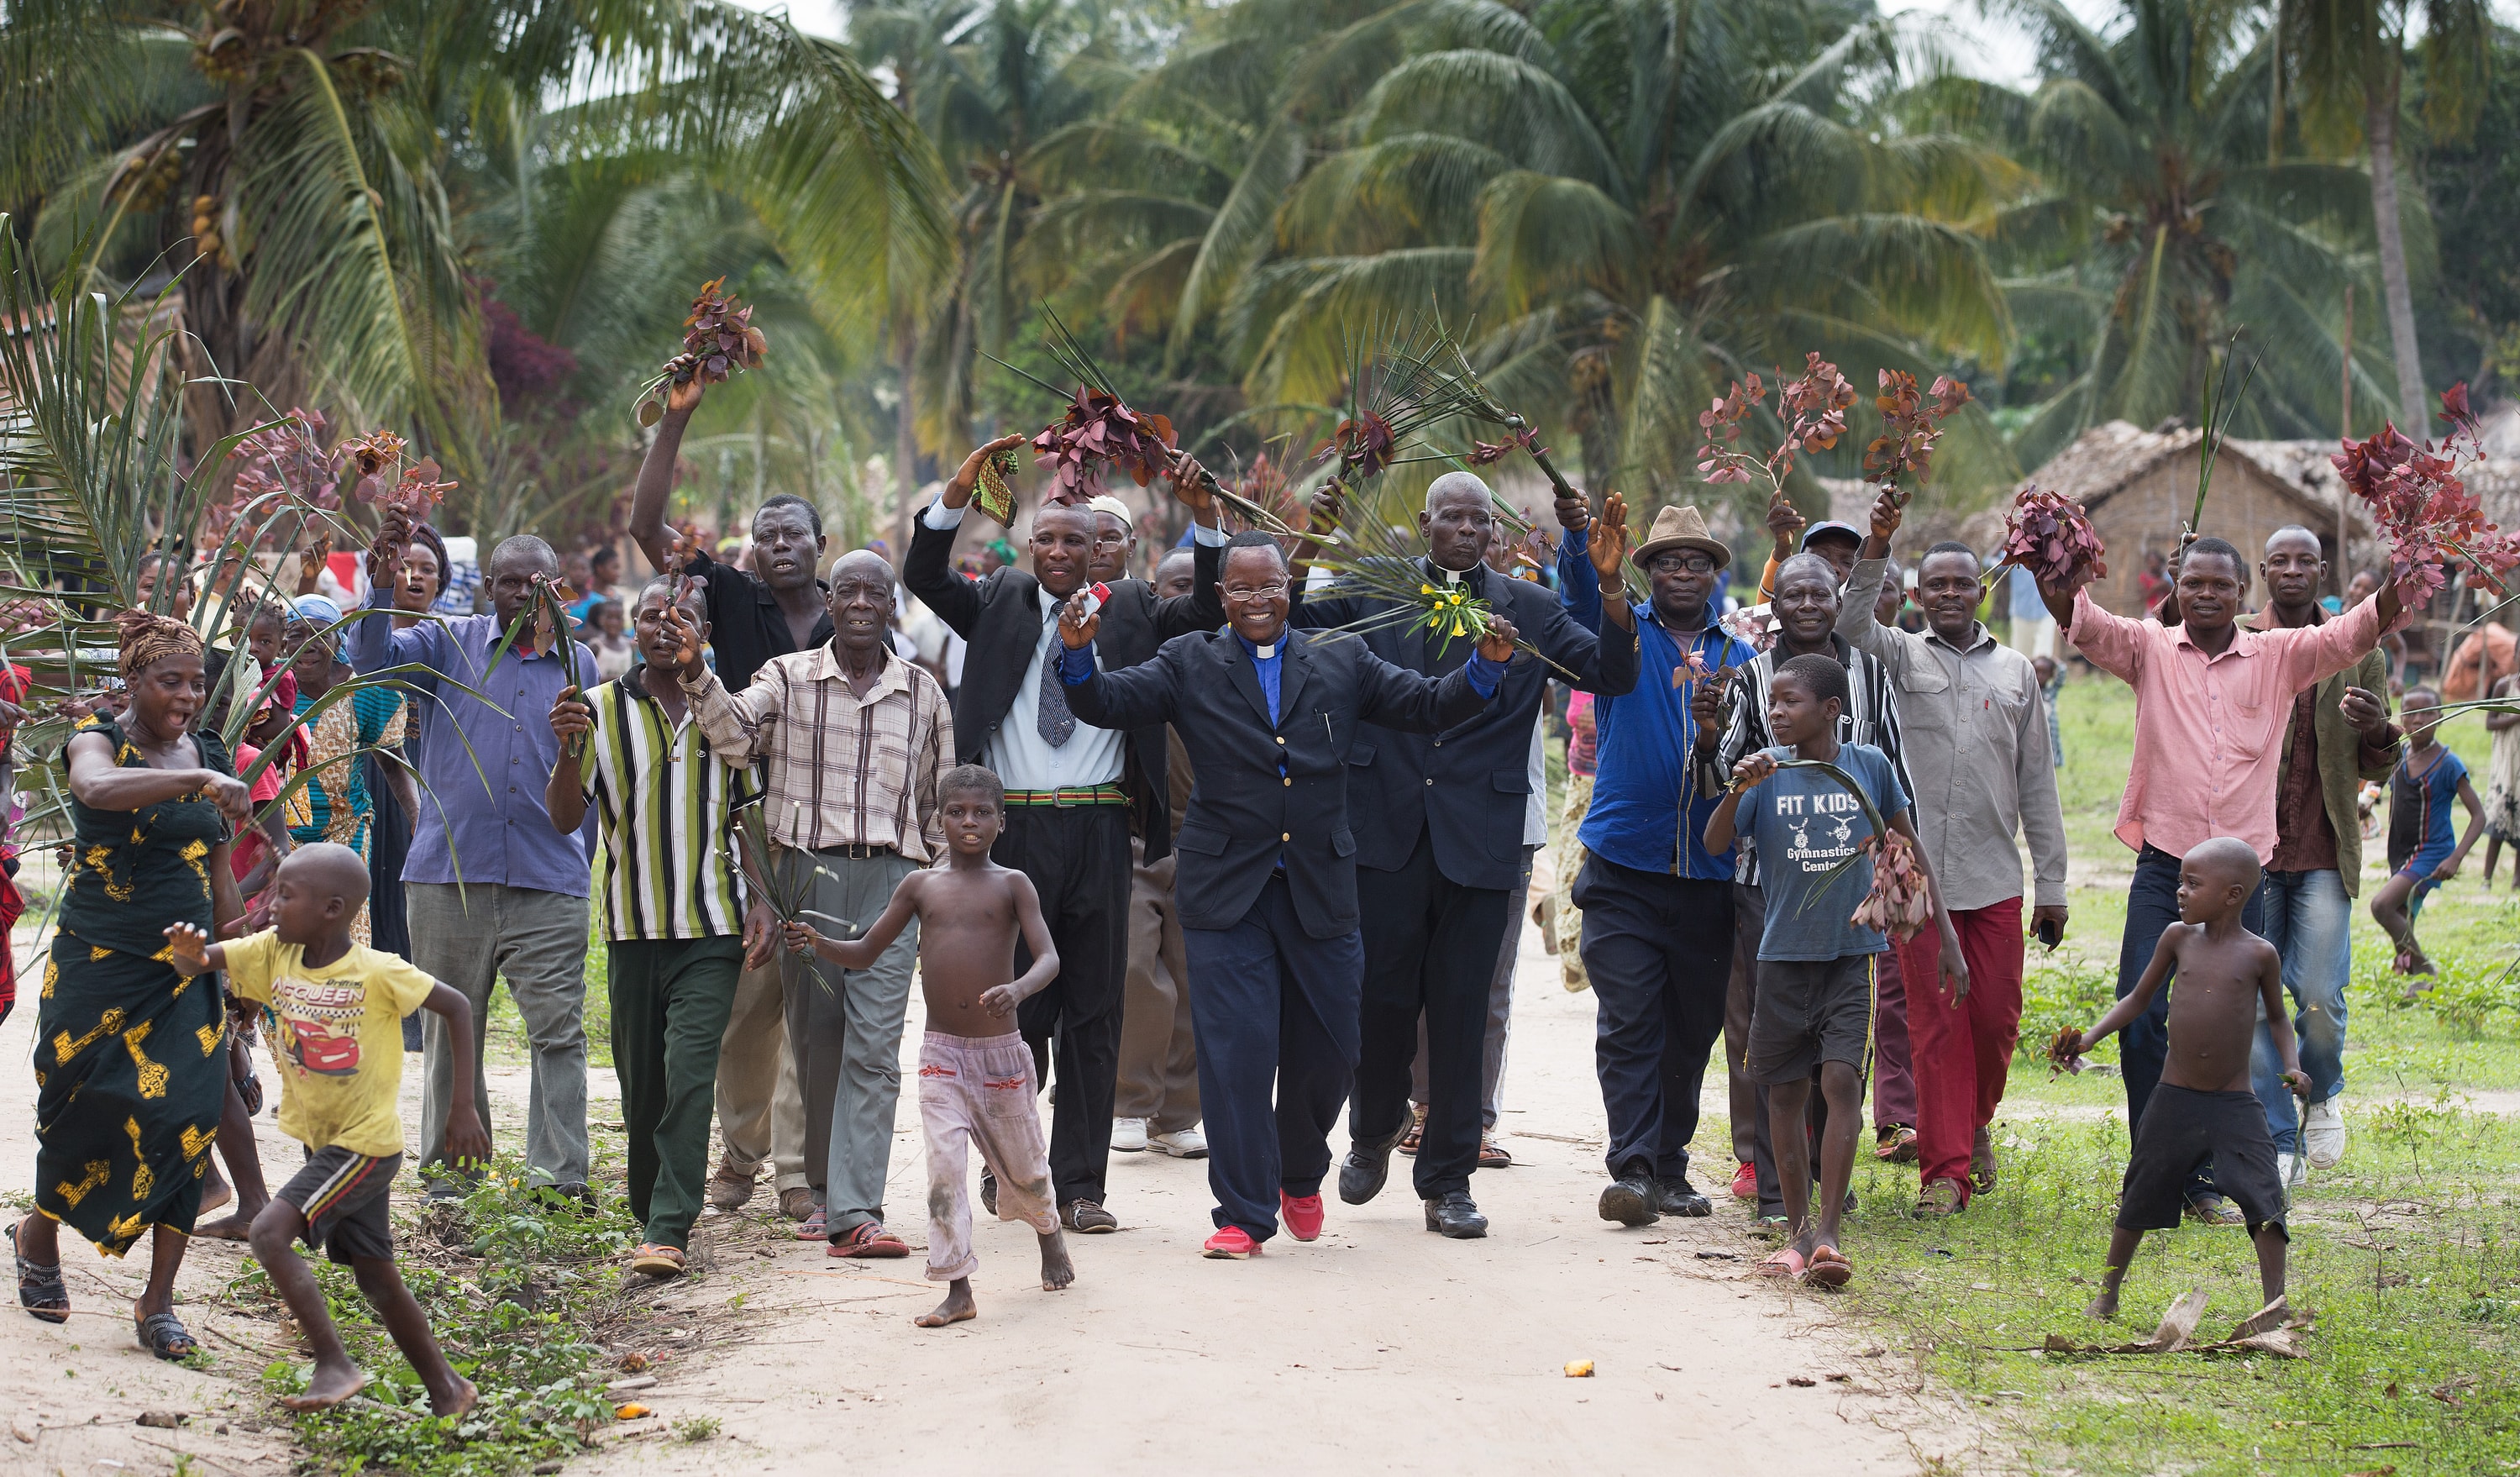 The Rev. Nyenda Okoko (center), a district superintendent, leads a procession of church members as they welcome visitors to Oye United Methodist Church, south of Kindu, Congo, in October 2015. Providing exact membership numbers is difficult in a denomination that spans multiple countries, languages and cultural understandings of church membership. File photo by Mike DuBose, UM News.